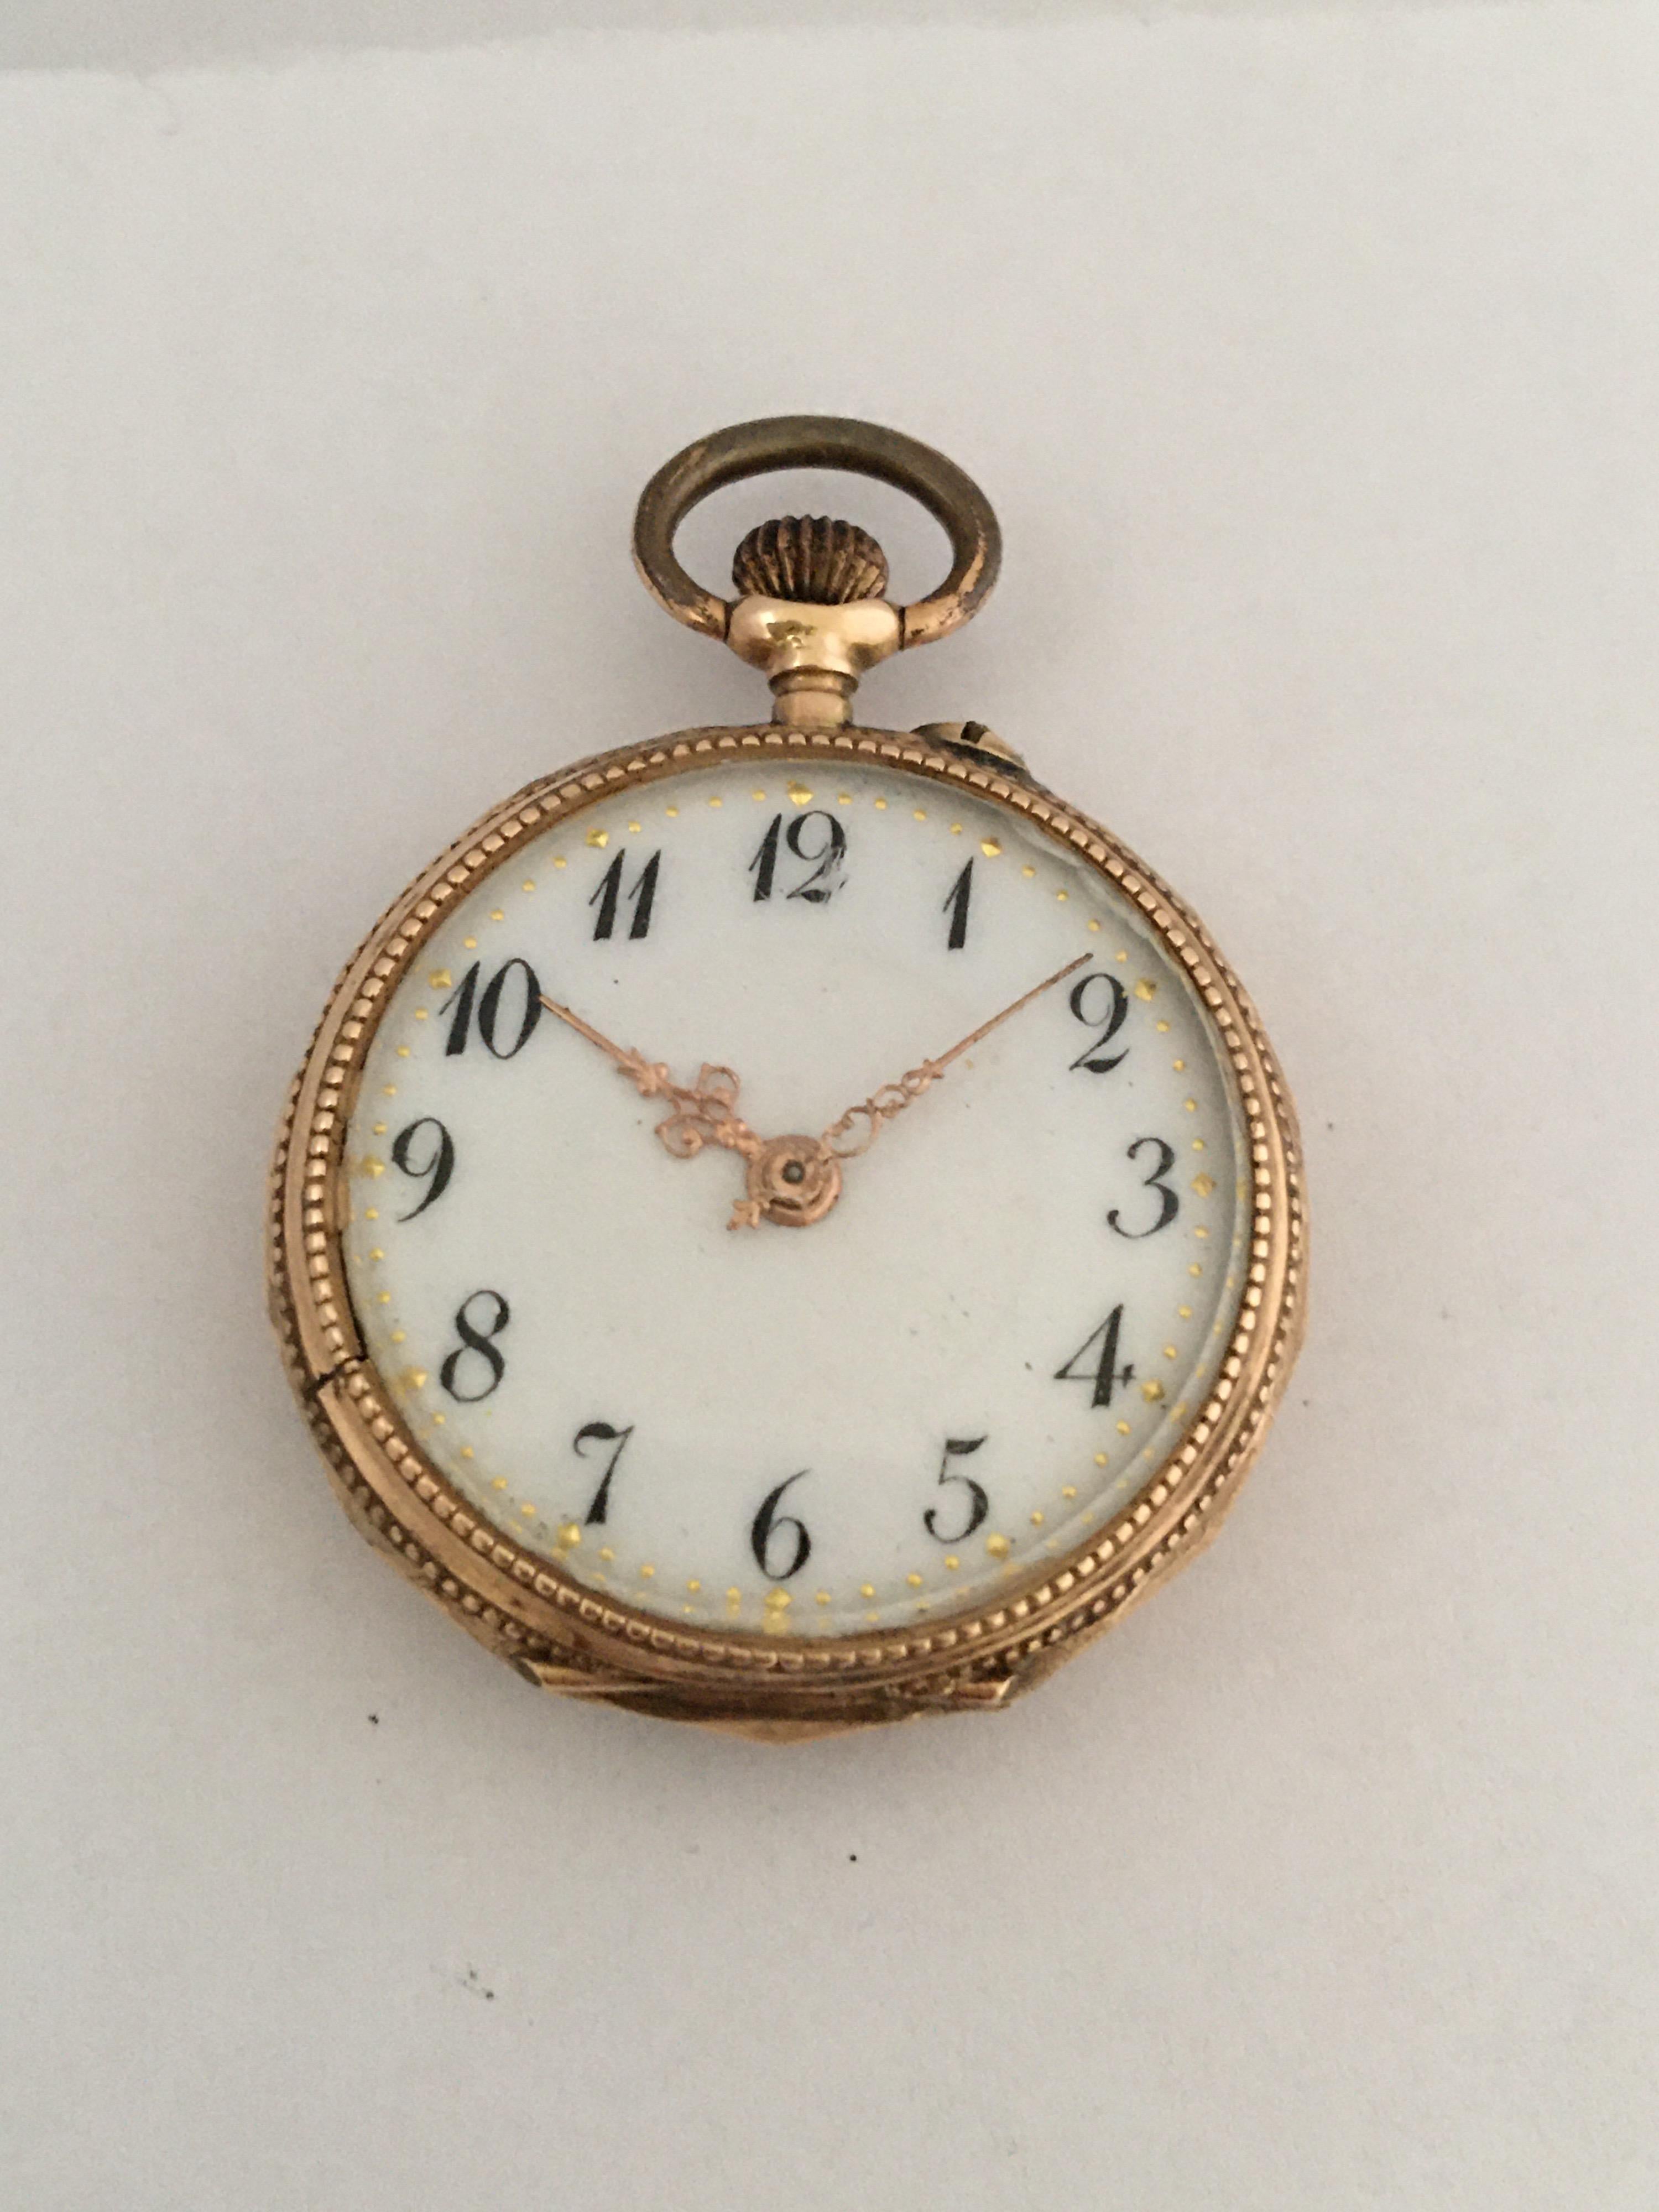 This beautiful 28mm diameter antique gold pendant watch is working and it is ticking well. Visible signs of gentle used with tiny scratches on the glass and tiny dents on the gold back case. A smooth running key-less and pin set Swiss Movement. This